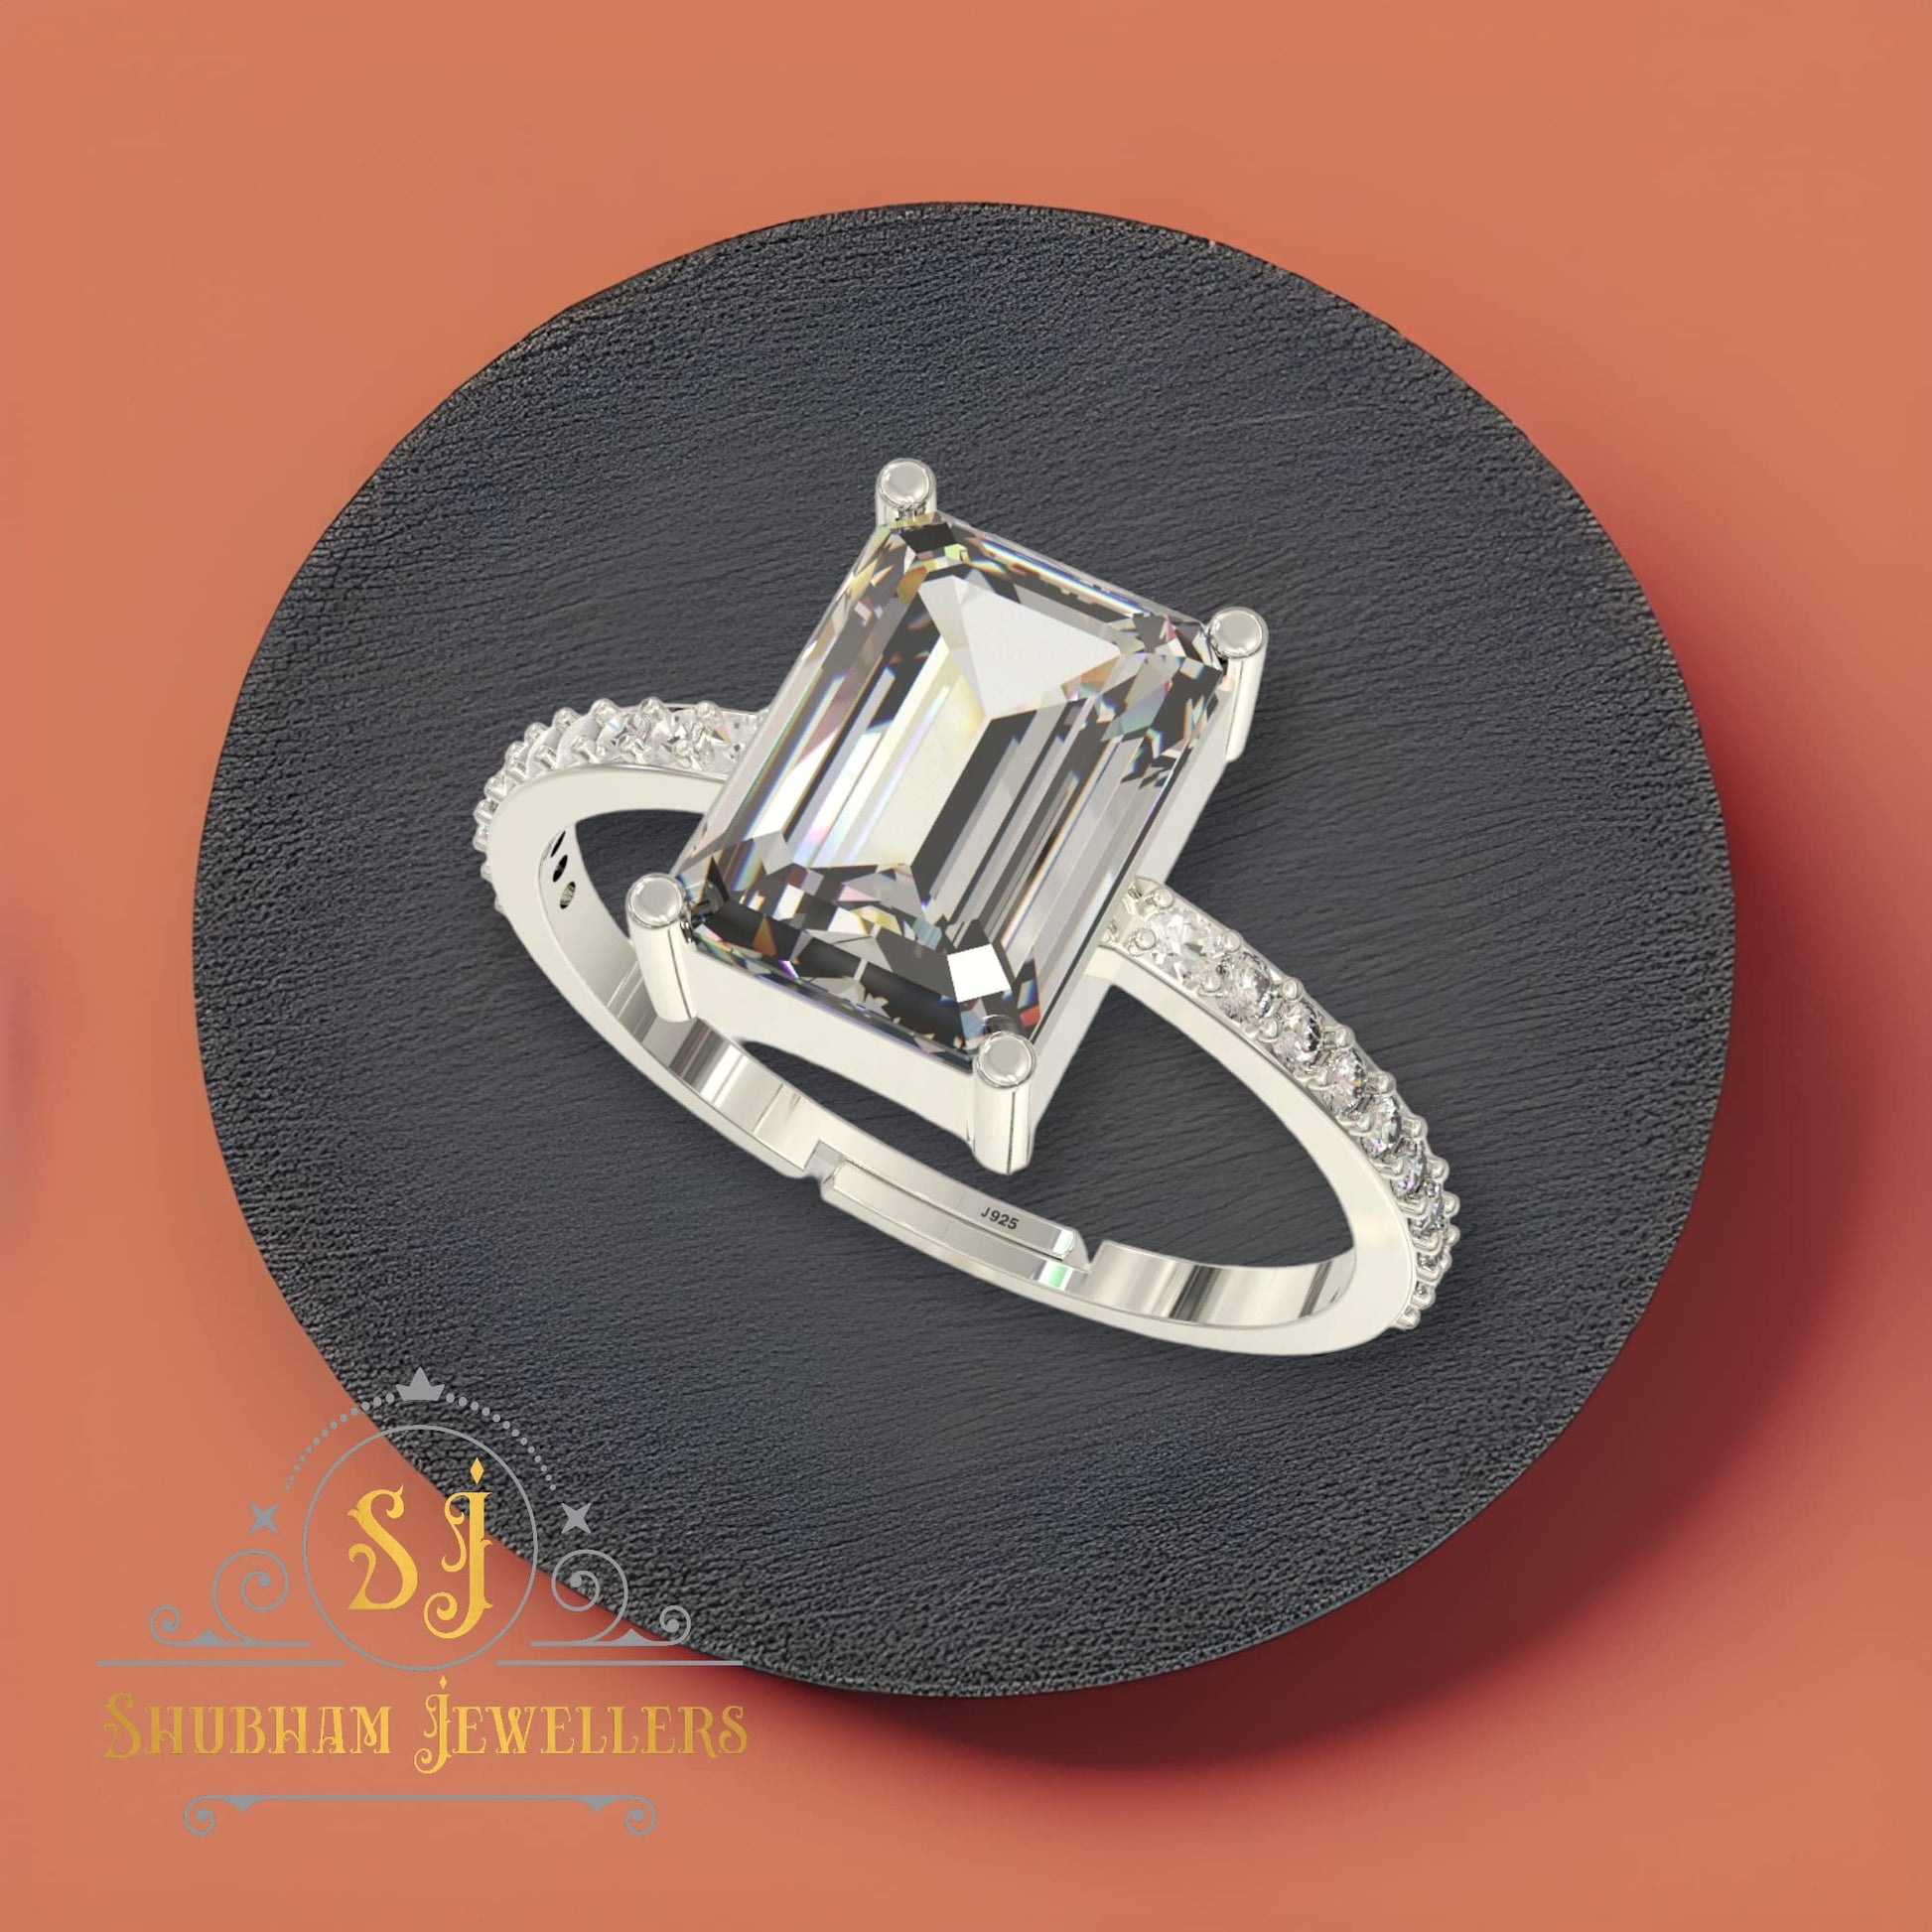 SJ SHUBHAM JEWELLERS™ 925 Sterling Silver Three Briliant Cut Design Adjustable Finger Ring with White CZ diamond for Women and Girls, Anniversary Gift for Wife, Valentine - JewelYaari By Shubham Jewellers